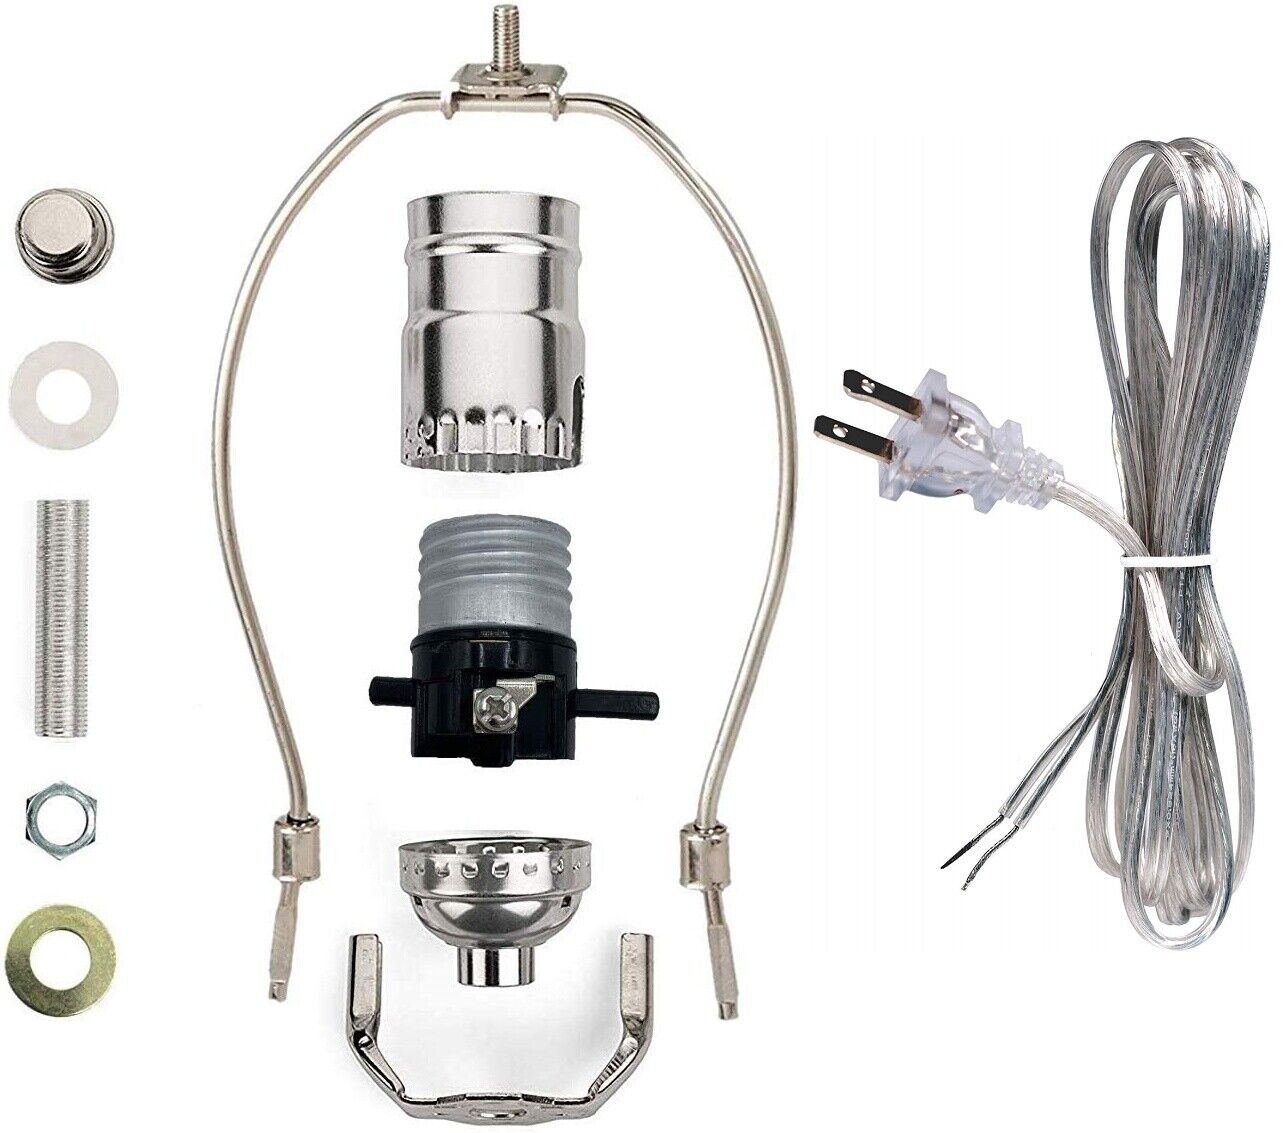 Silver Finish Make-A-Lamp Kit With All Parts & Instructions for DIY Lamp Repair